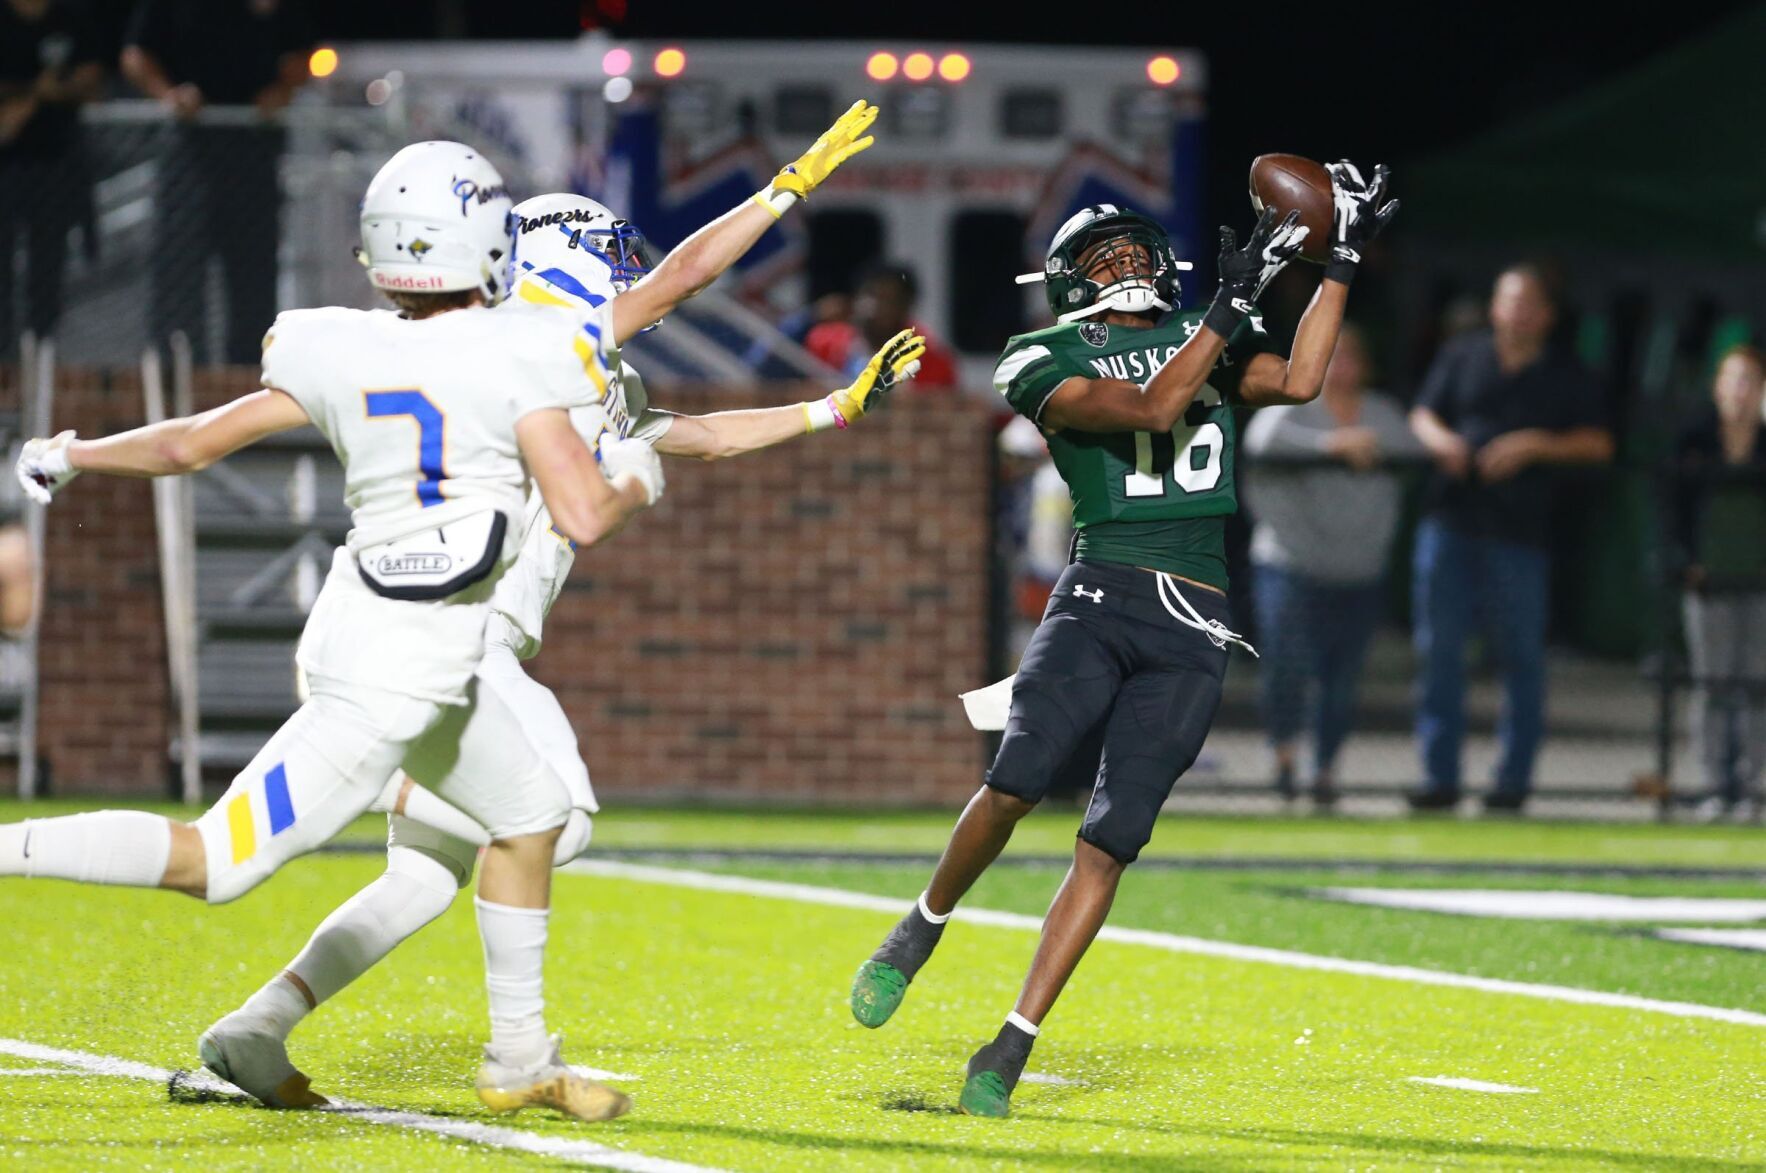 Muskogee’s Remarkable Turnaround Propels Them to Semifinals